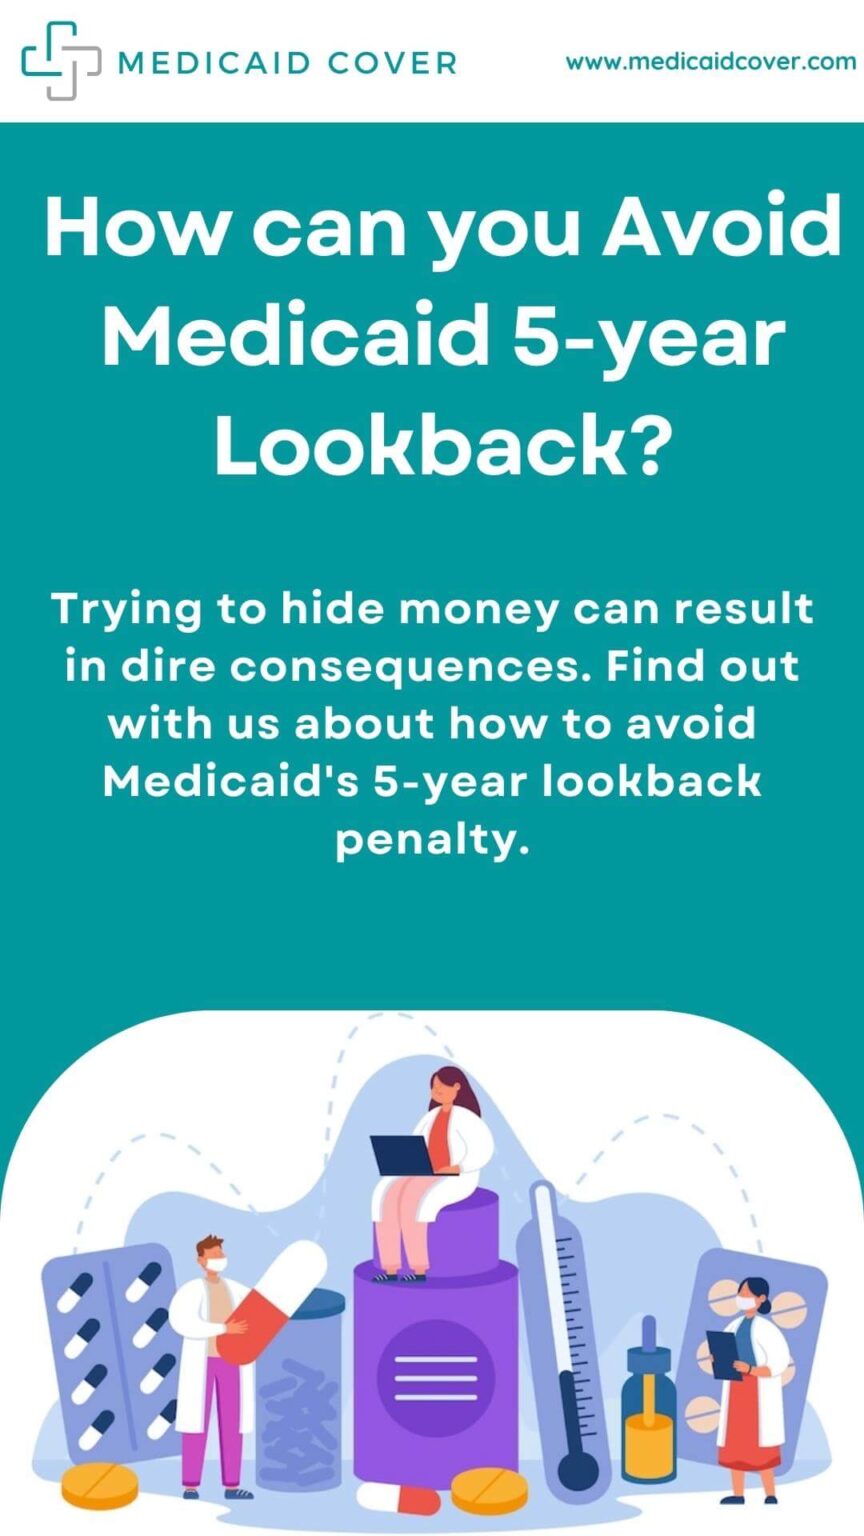 How Can You Avoid Medicaid Look Back Period For 5 To 7 Years